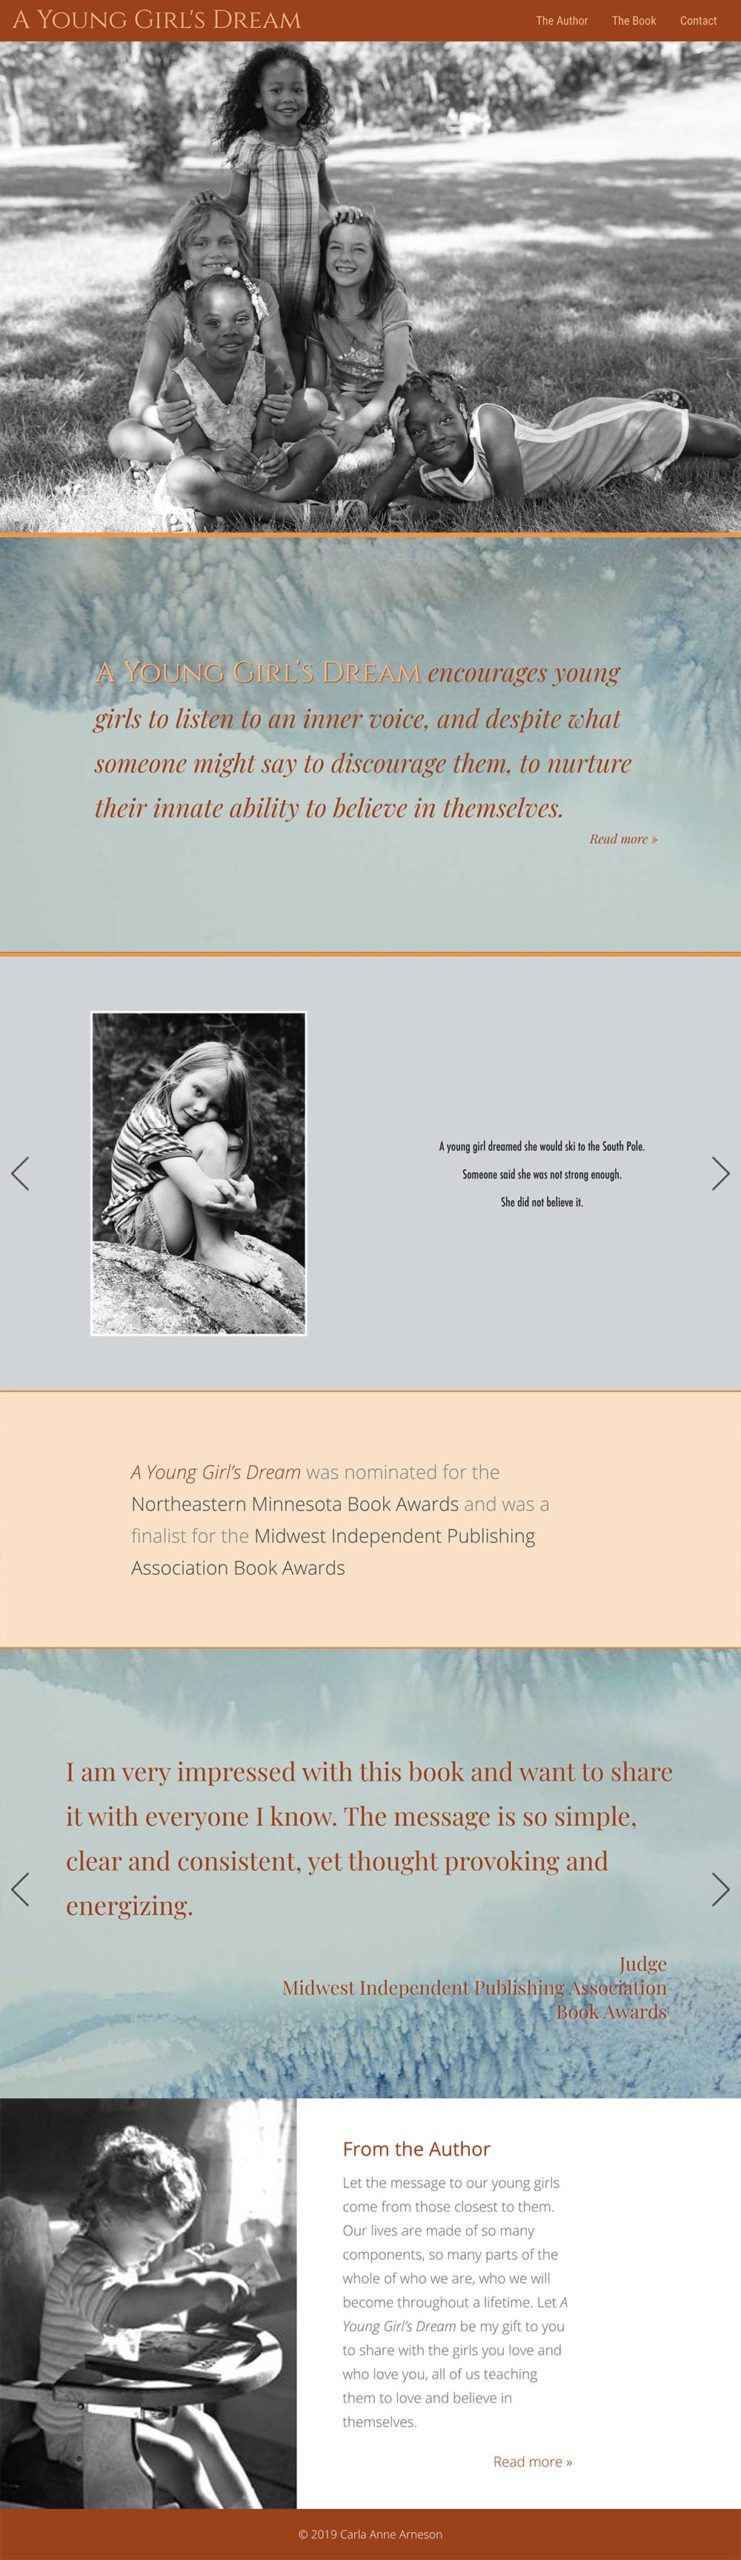 Web design for an author. The long-scrolling homepage features the cover image from the book, a description of the book's purpose, a carousel of page-spreads from the book, awards, reviews and a short bio of the author. The design reflects the design of the book itself.